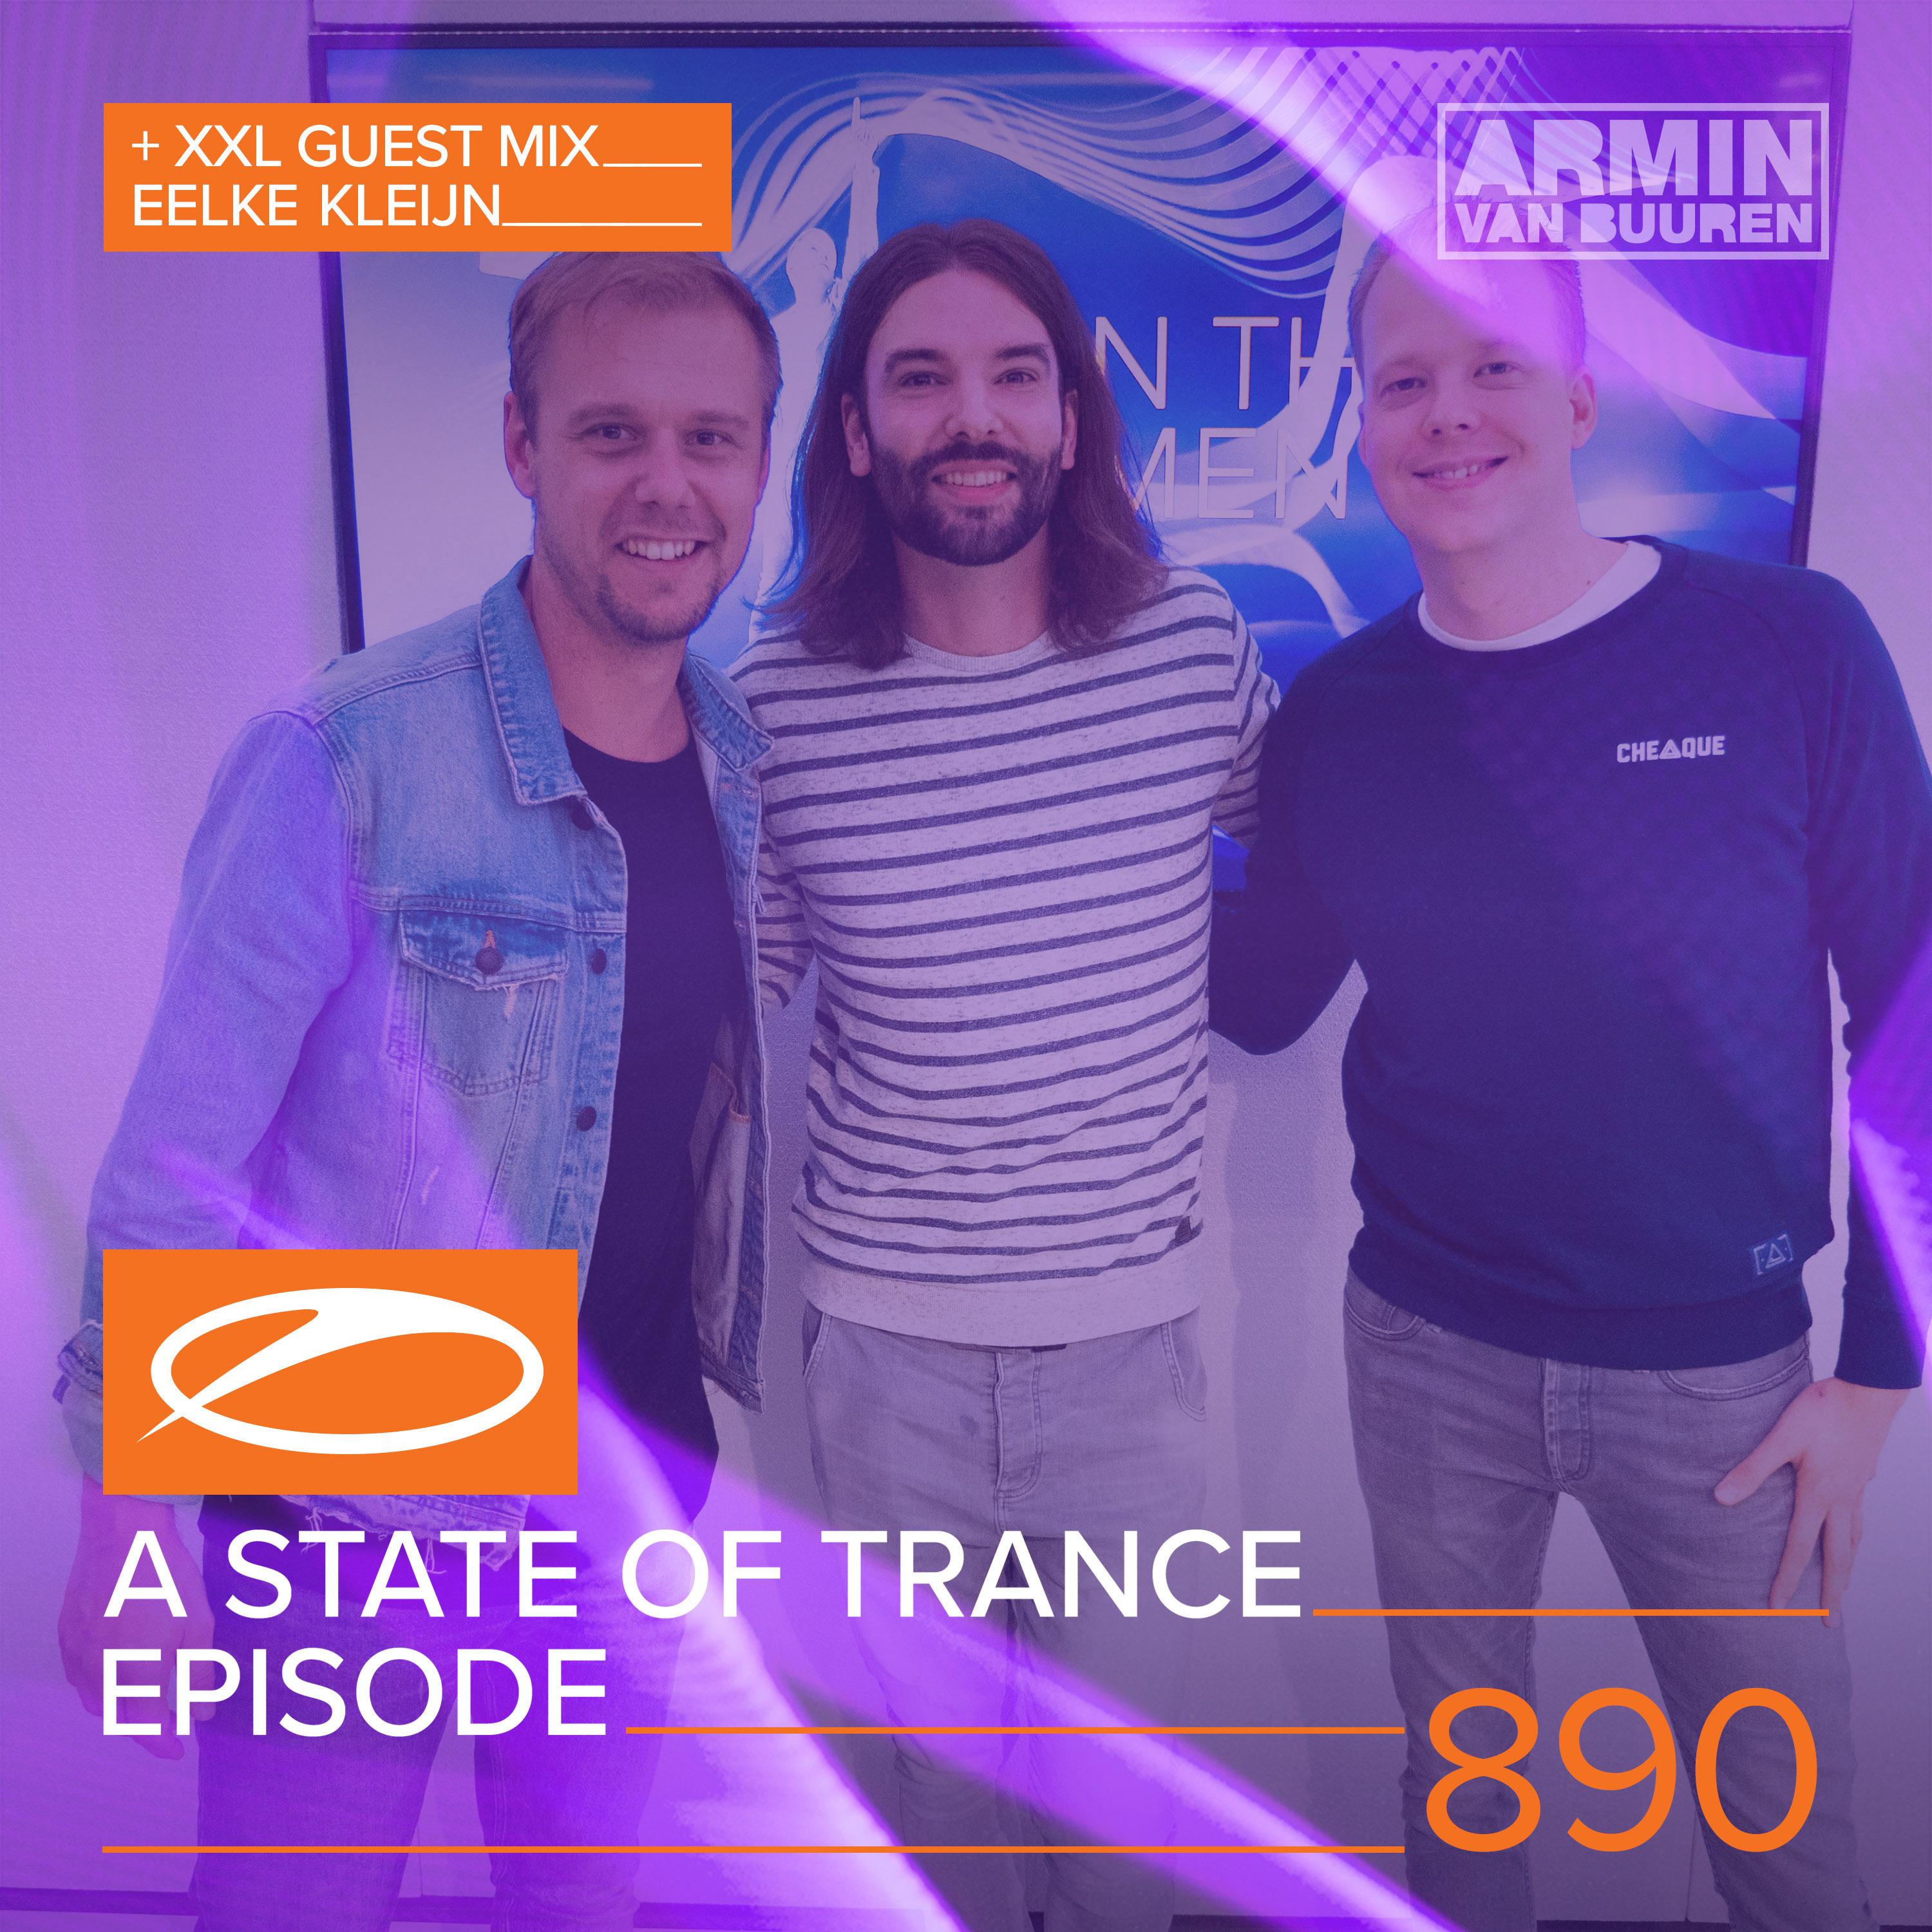 A State Of Trance (ASOT 890) (Interview with Eelke Kleijn, Pt. 2)